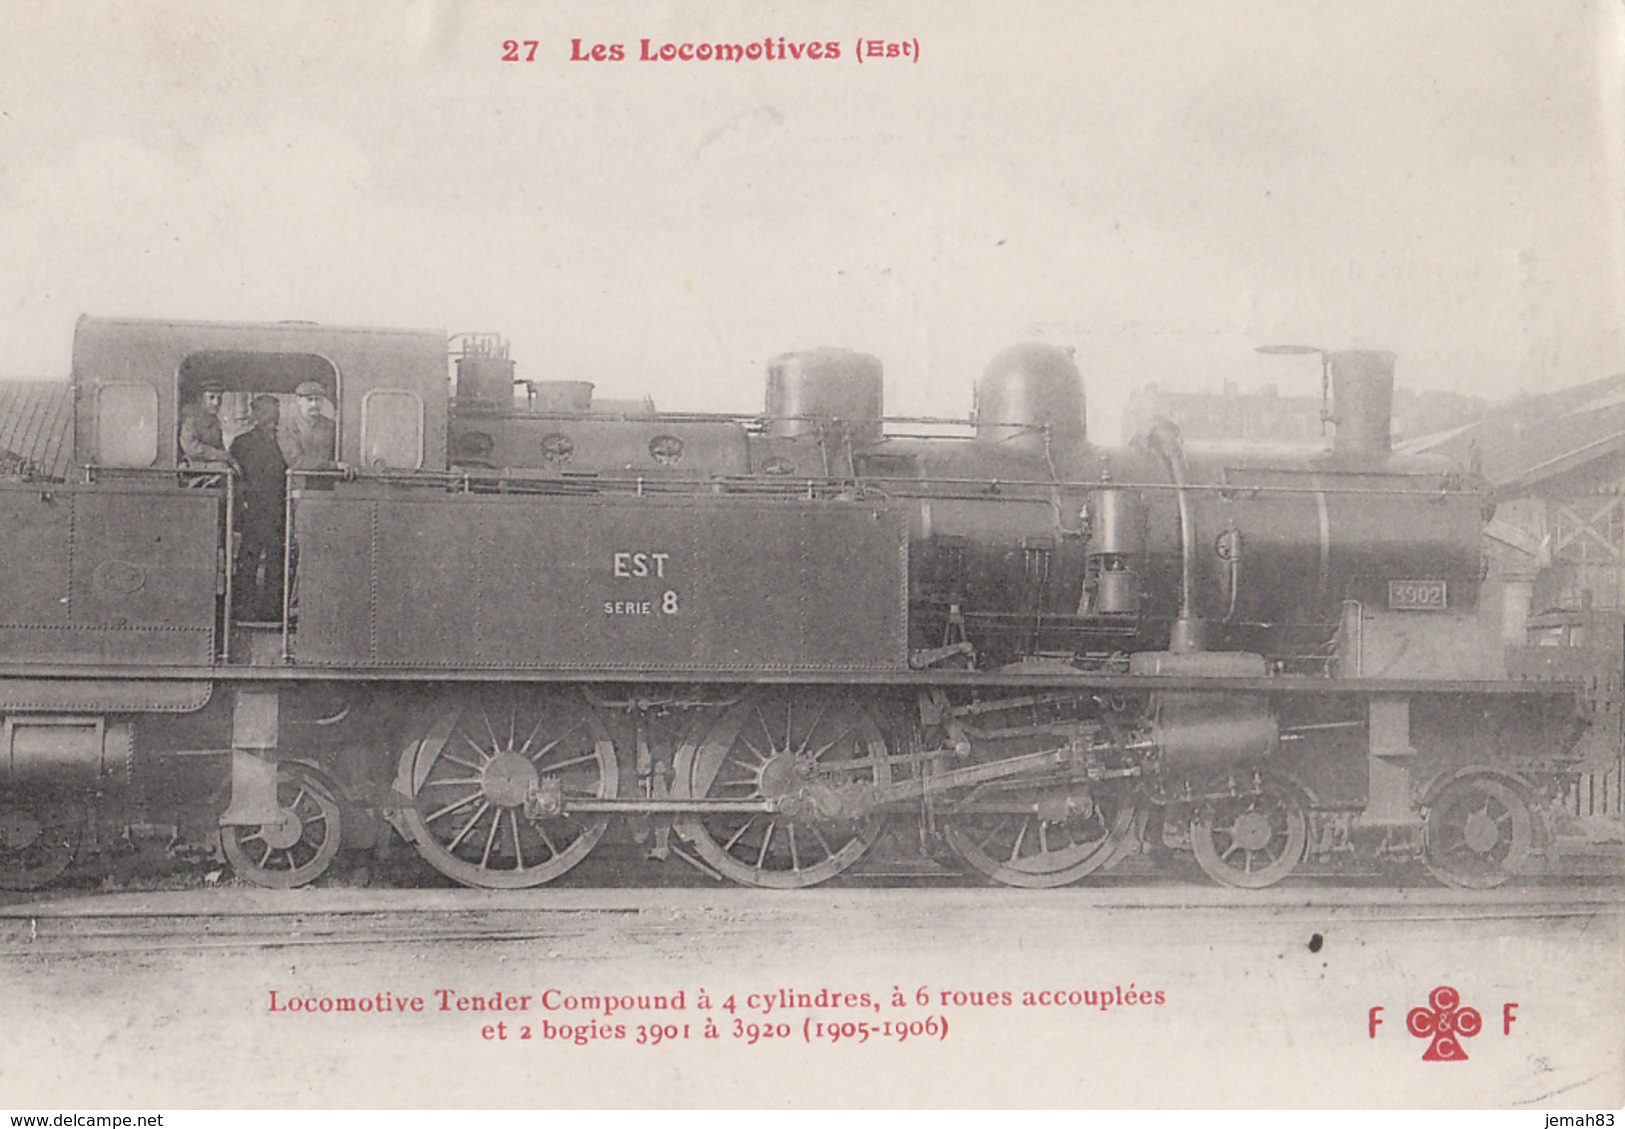 LES LOCOMOTIVES(est) Locomotive Tender Compound A 4 Cylindres A 6 Roues(LOT AE18) - Equipo